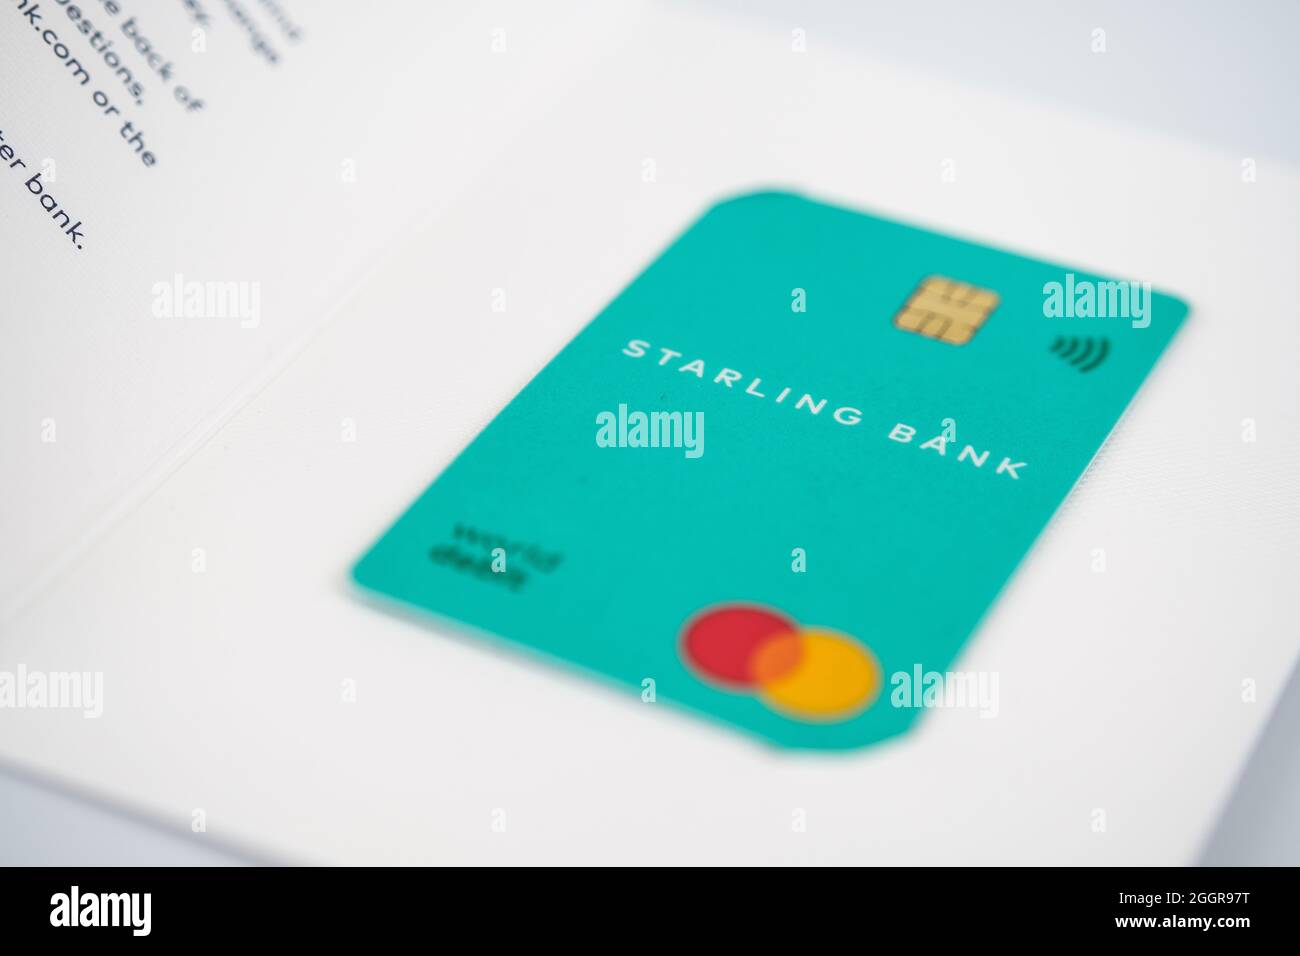 Starling Bank Debit Card in the envelope received by post. Mobile app based bank. Selective focus. Stafford, United Kingdom, September 2, 2021. Stock Photo